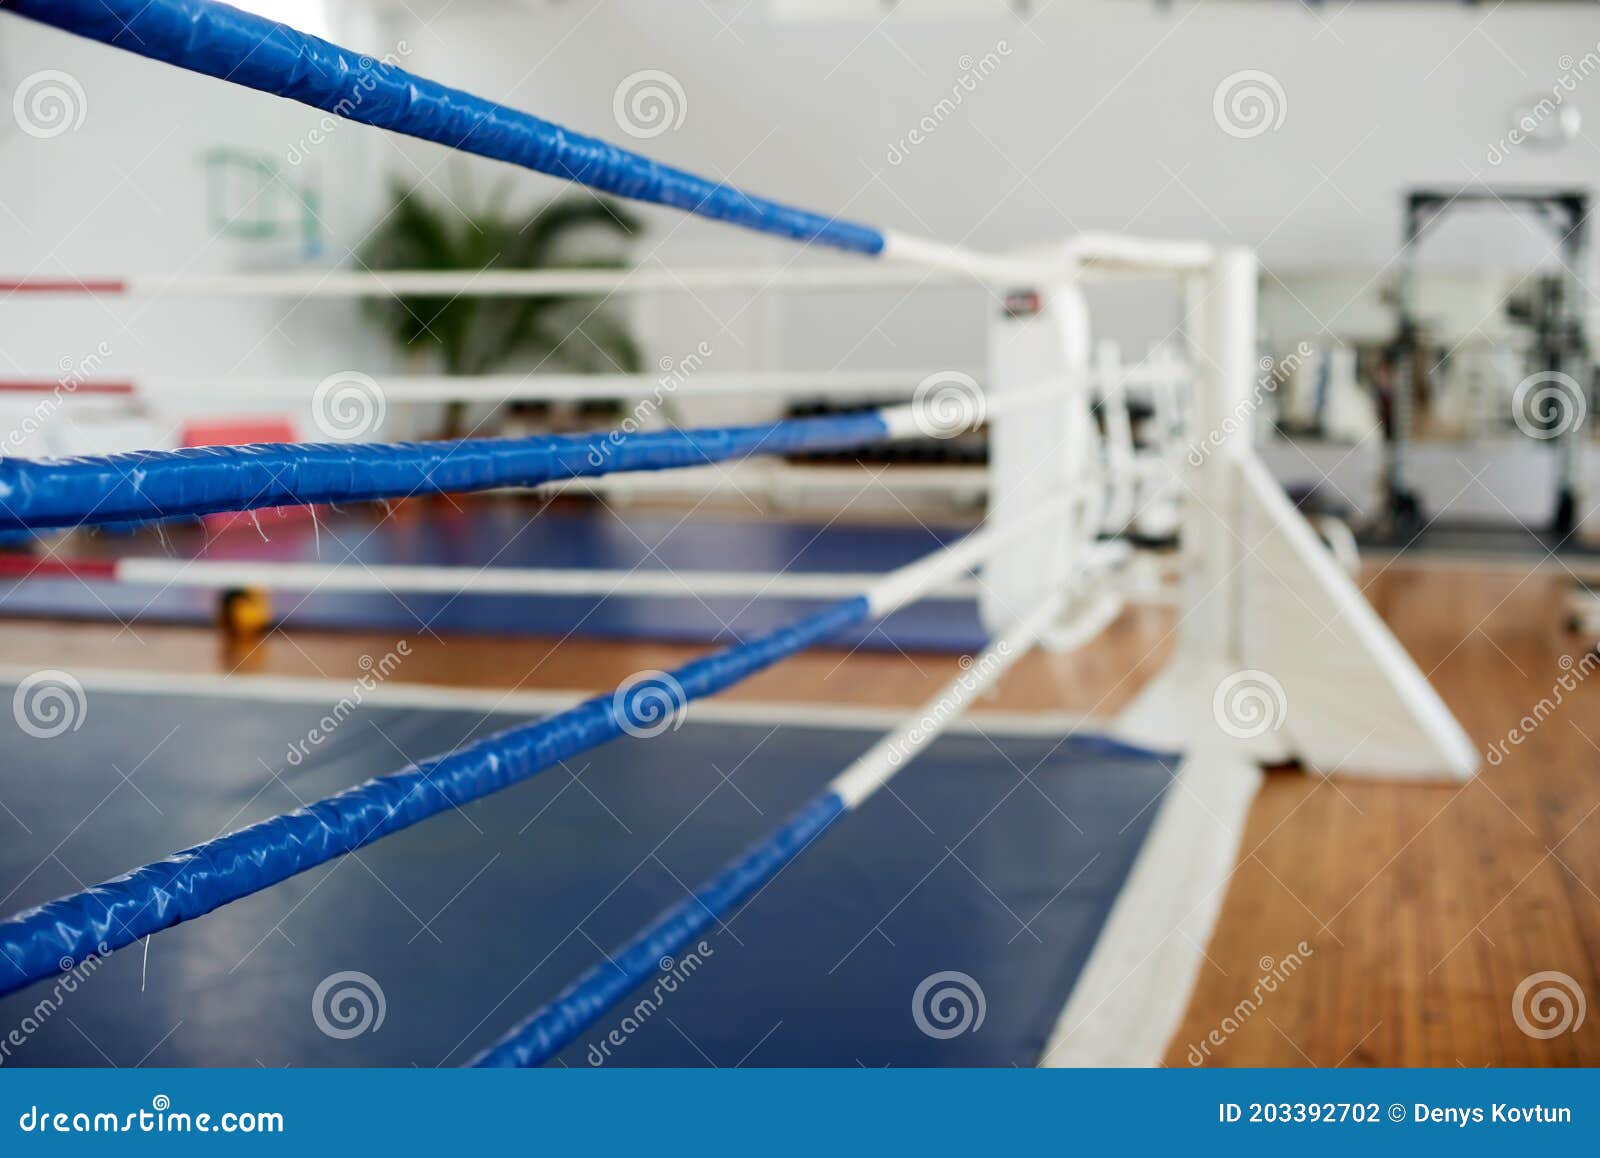 Boxing ring - OR-55 - Foreman Fitness Europe GmbH